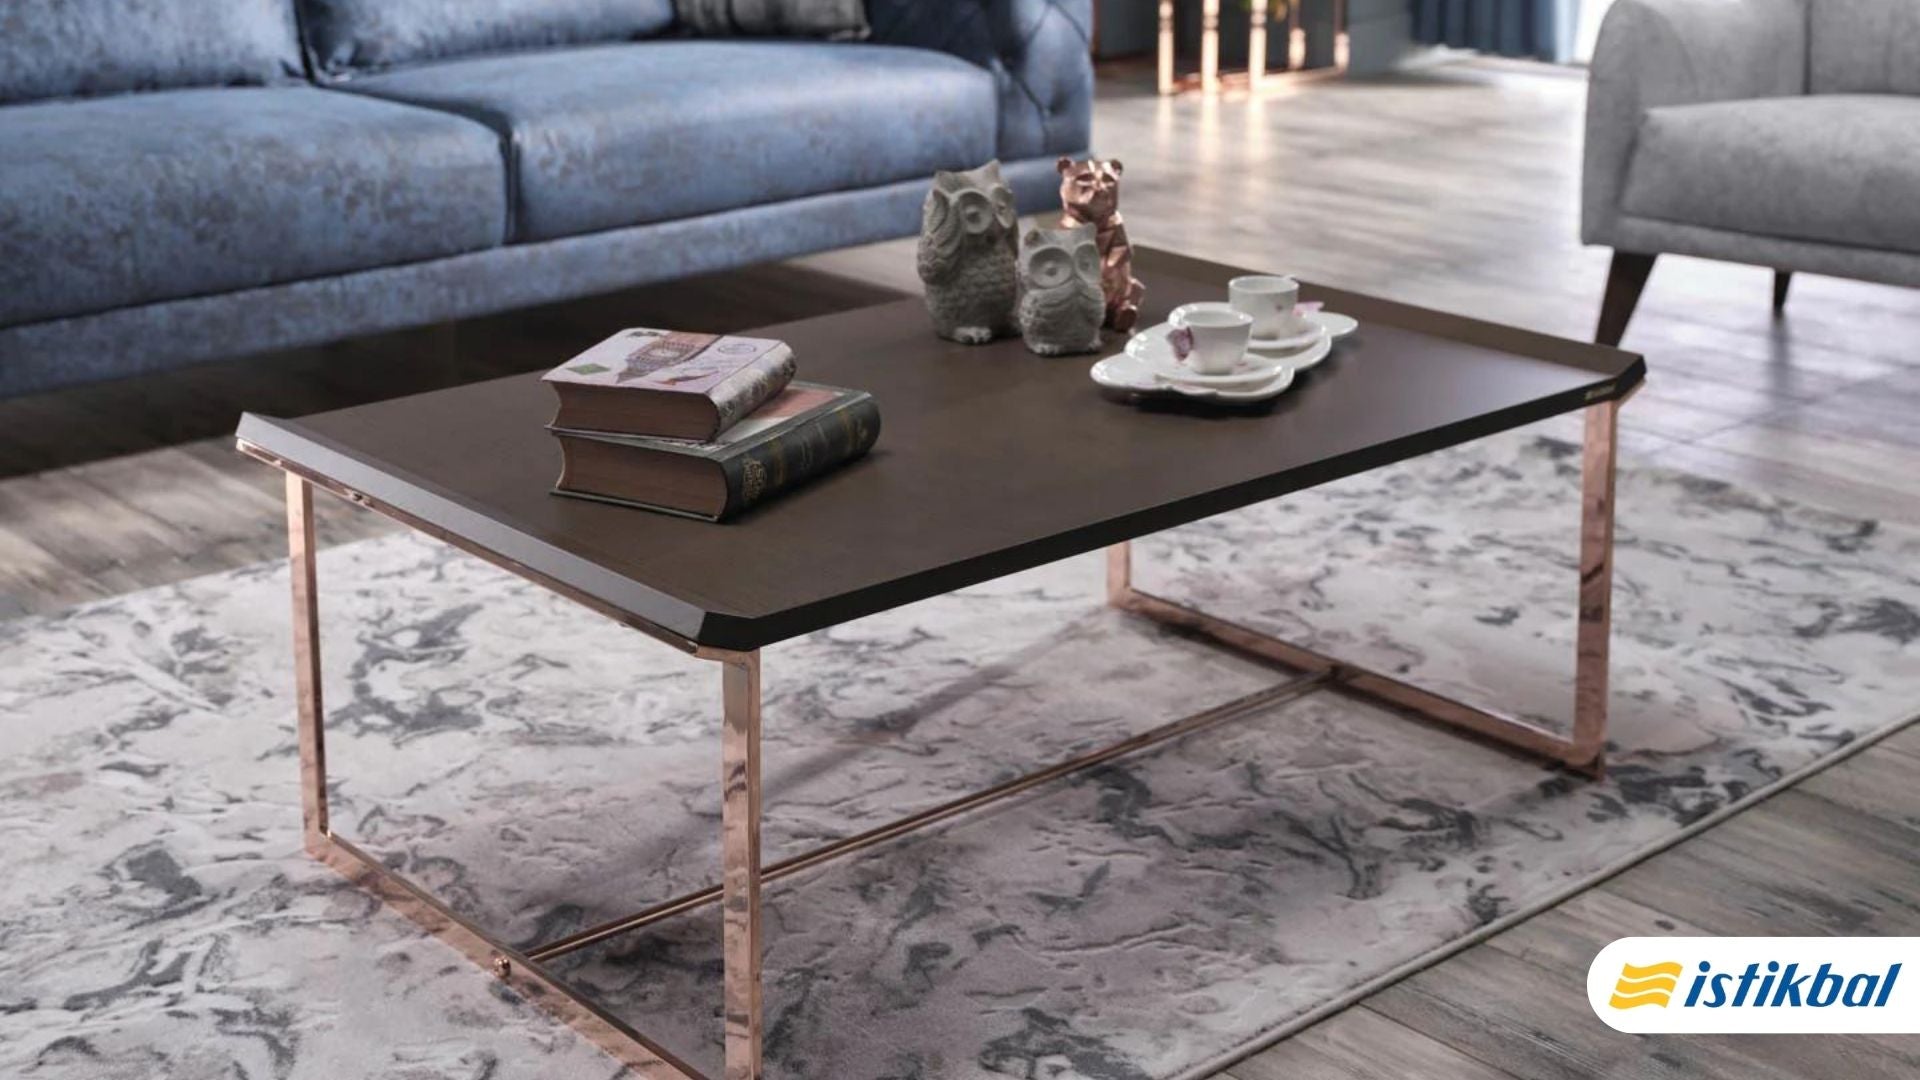 Embark on a Journey with Istikbal UK’s Coffee Tables